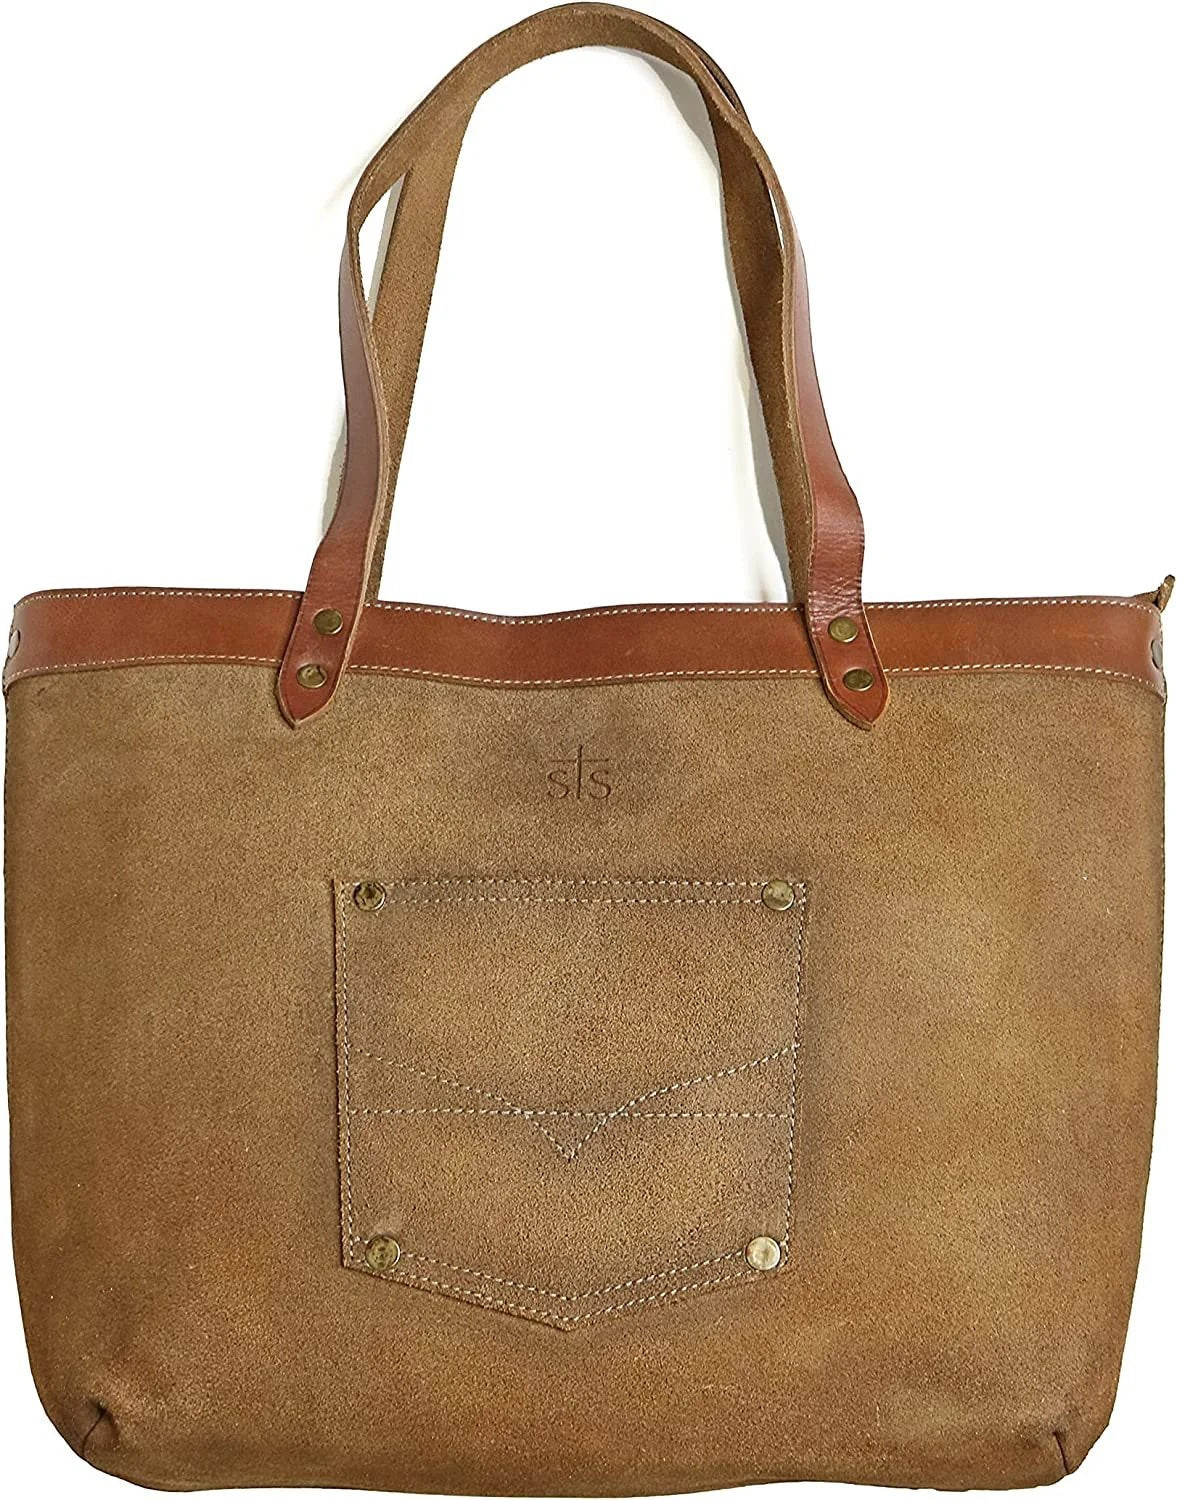 'Carroll Companies-STS' Women's Conceal Carry Calvary Tote - Brown